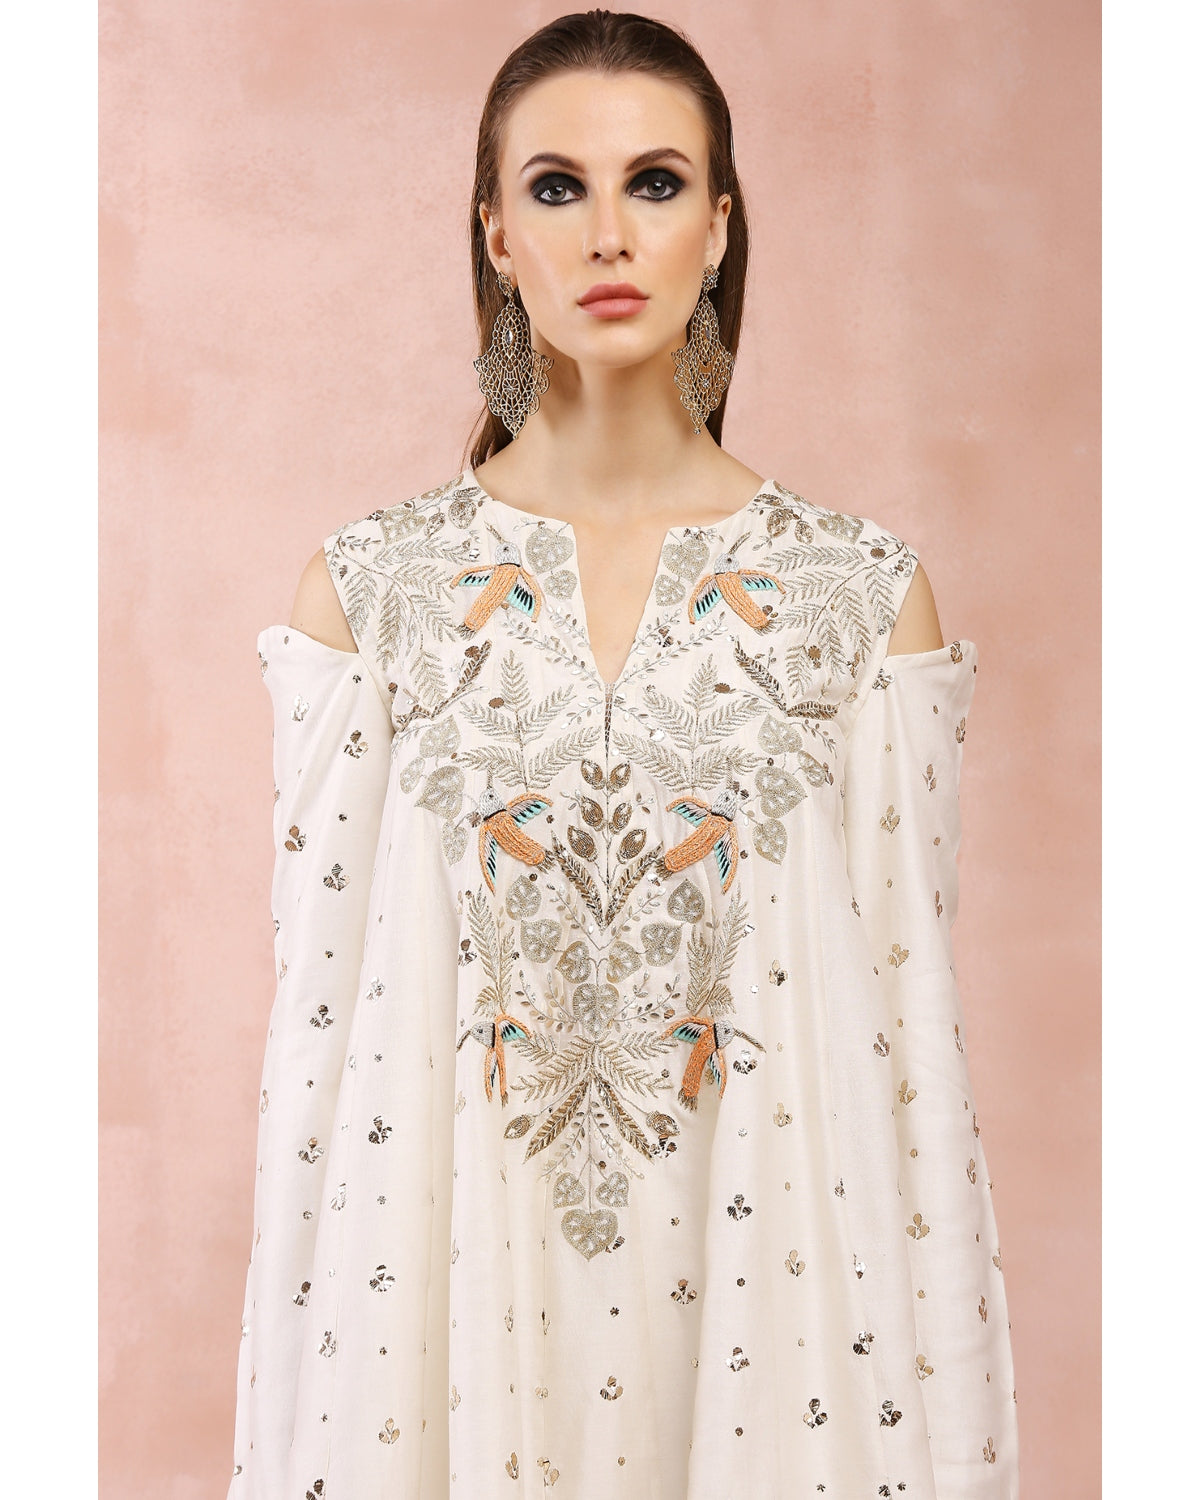 Off White Embroidered Kurta With Salwaar And Dupatta